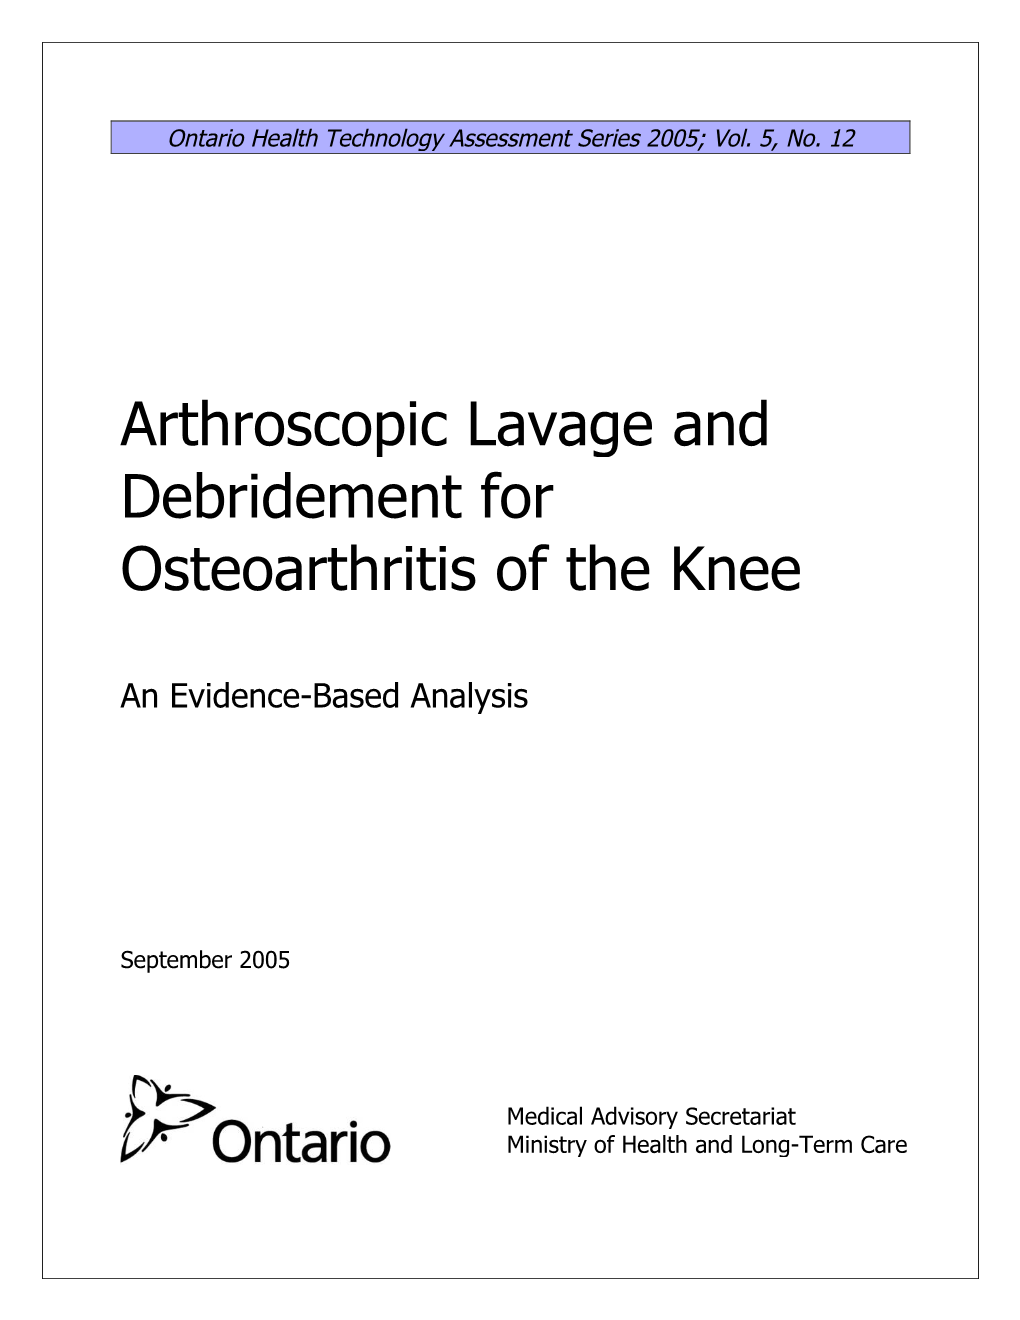 Arthroscopic Lavage and Debridement for Osteoarthritis of the Knee